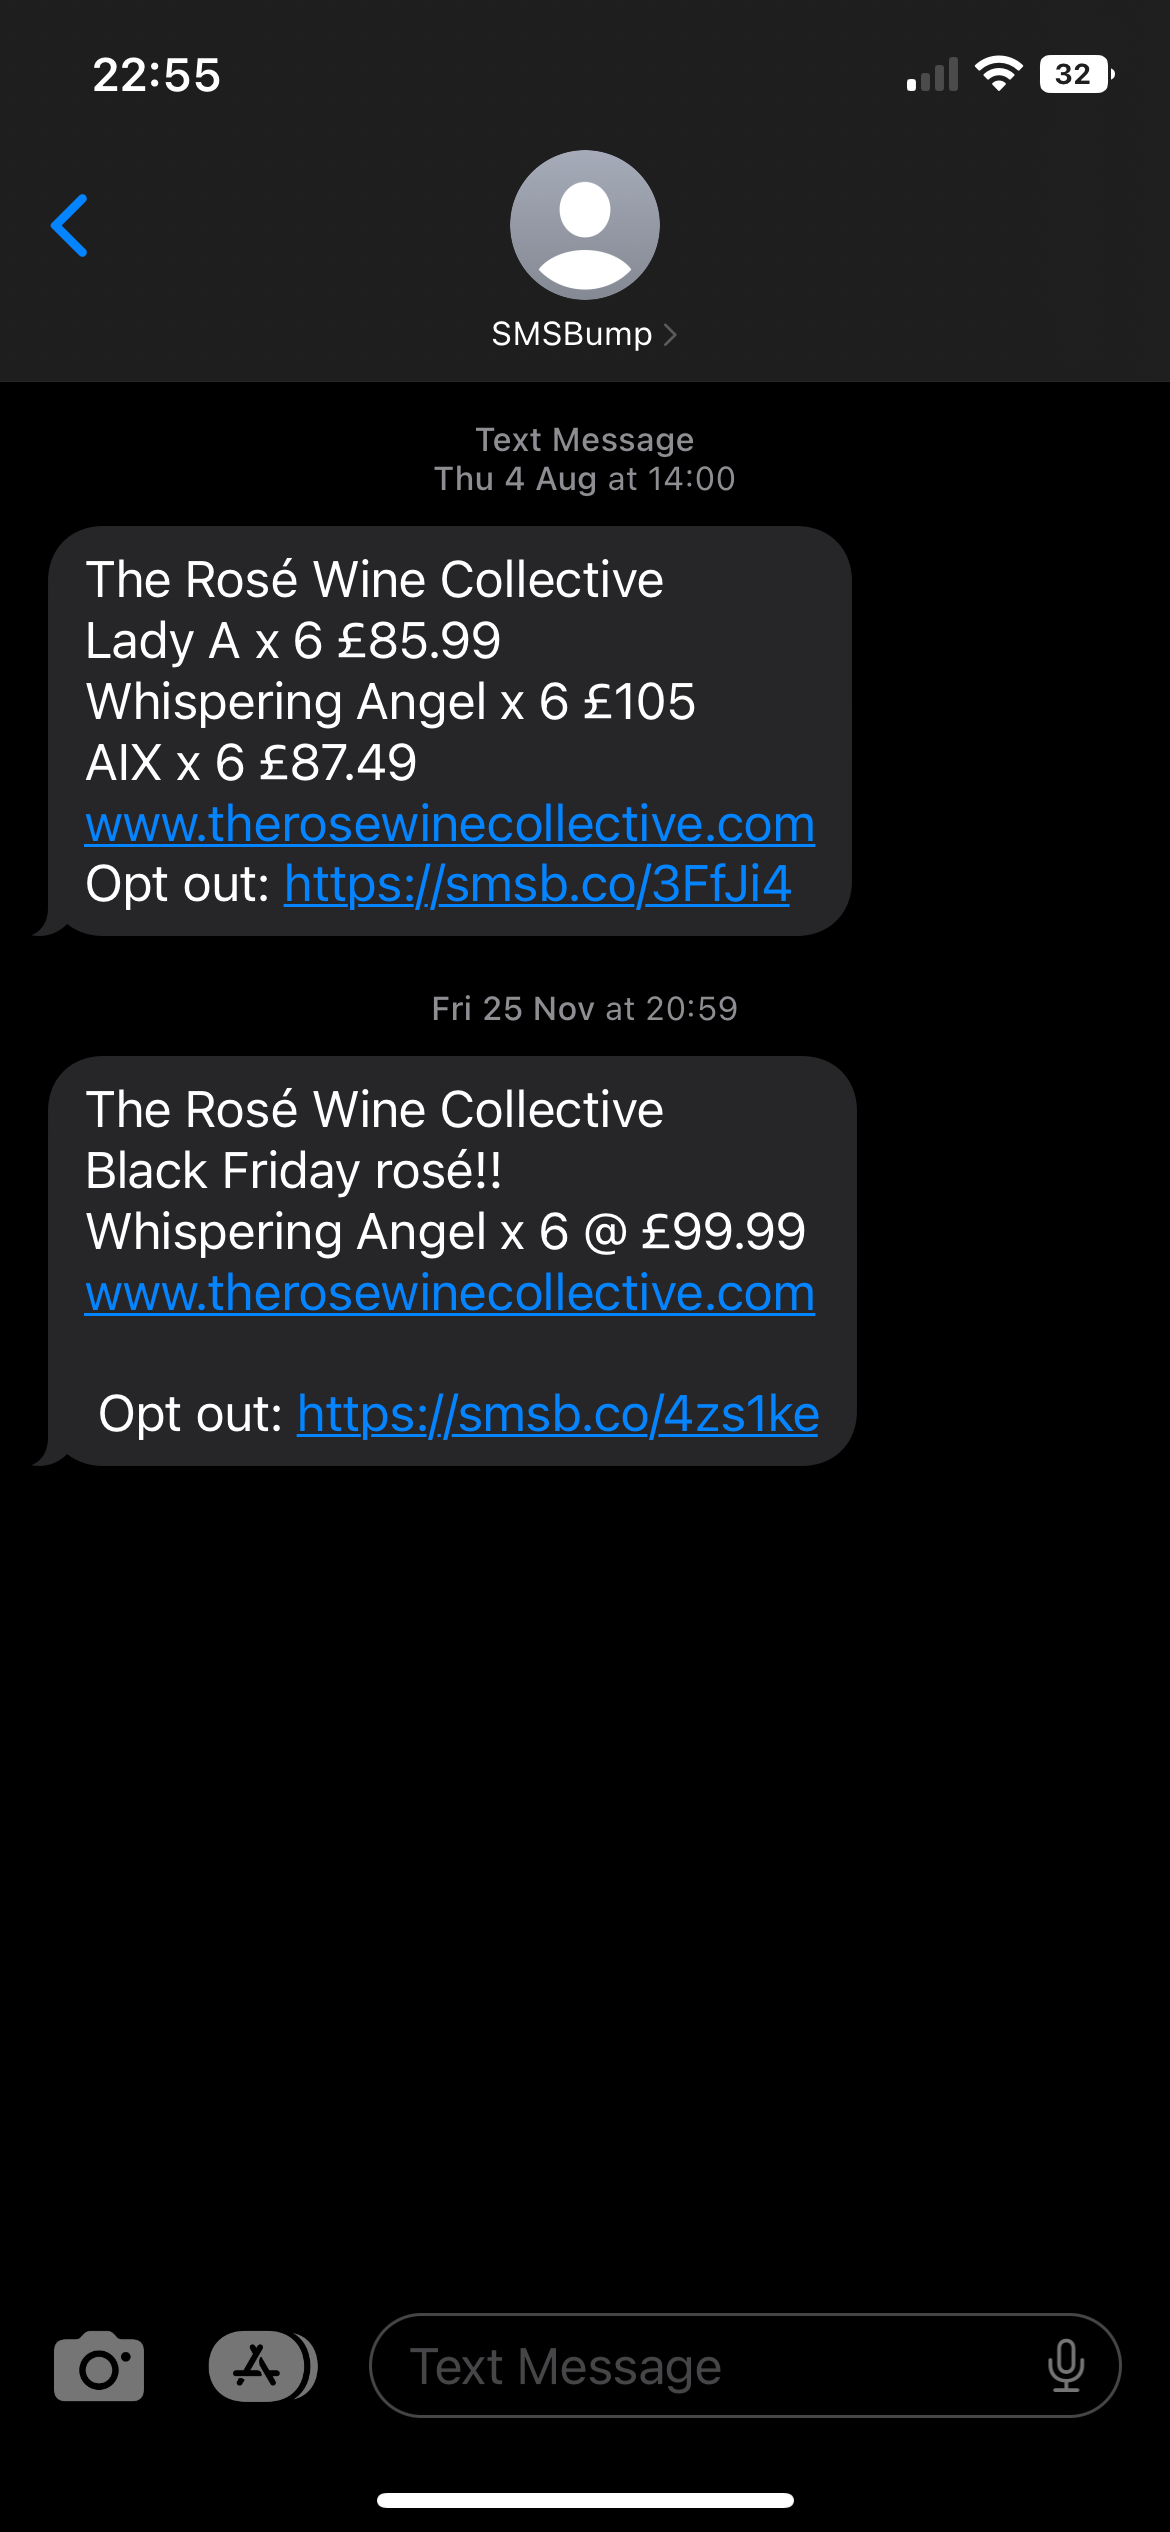 humourous text from a rose wine seller a little like a drug dealer talking about deals